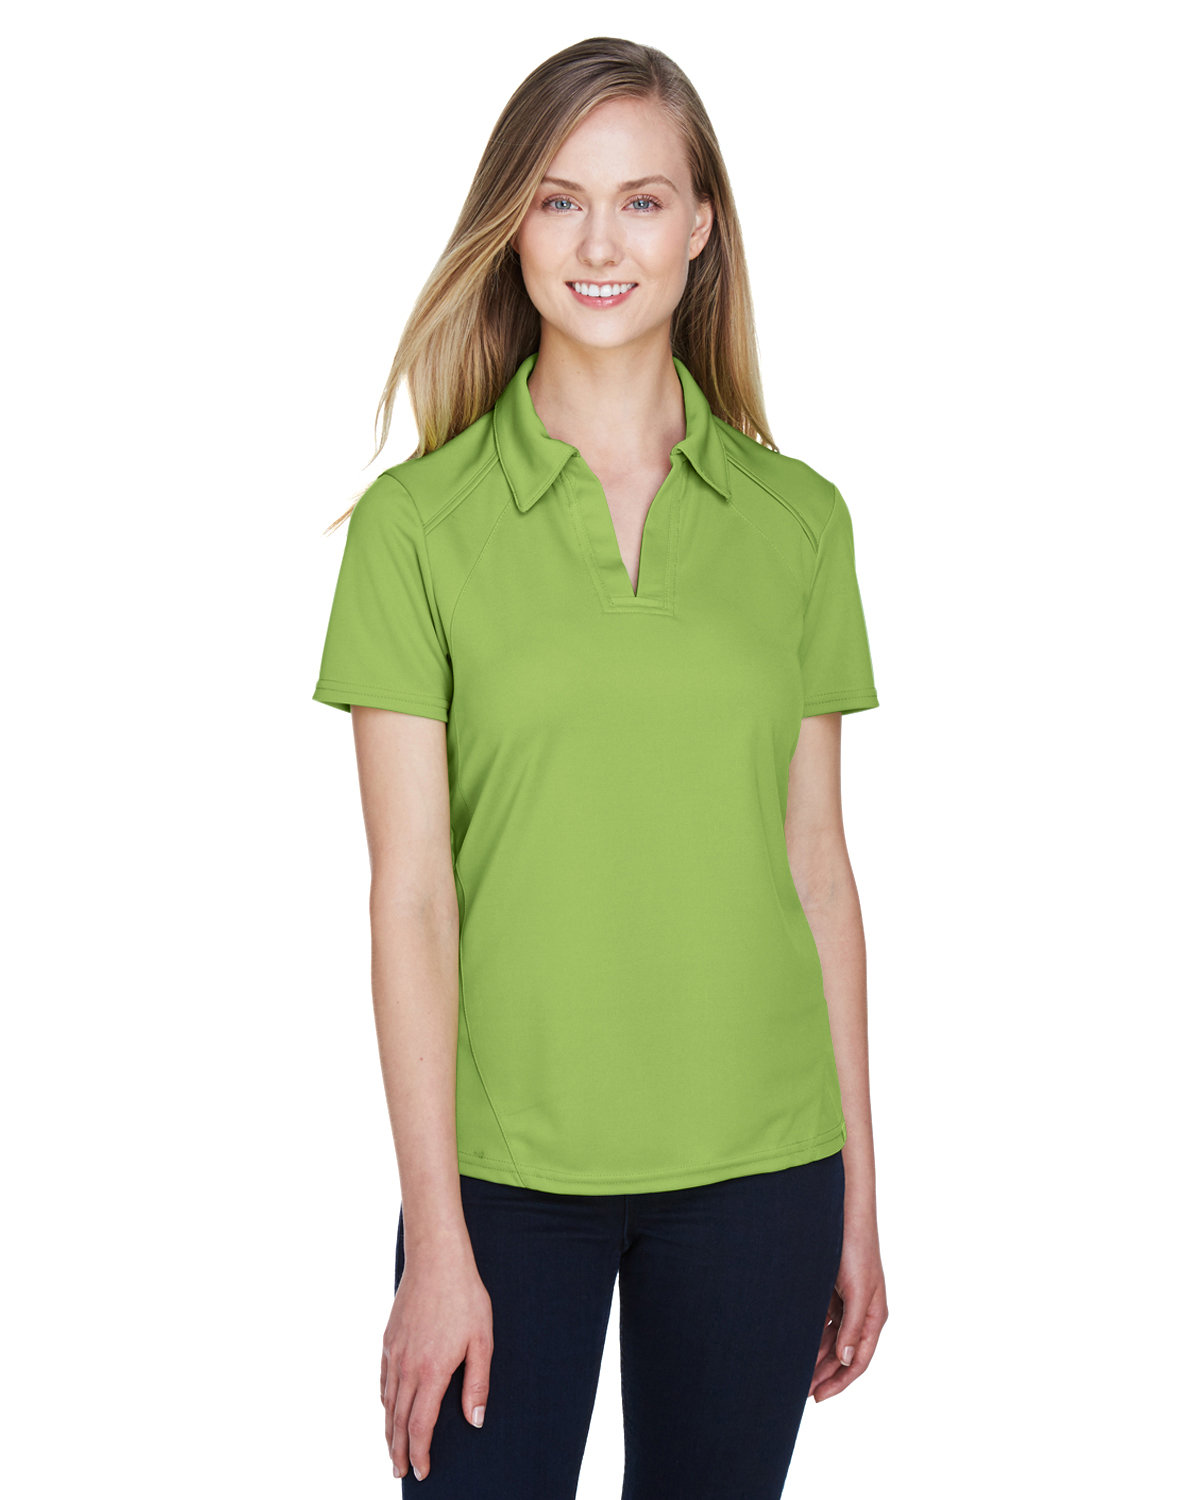 Ladies Recycled Polyester Performance Pique Polo-North End